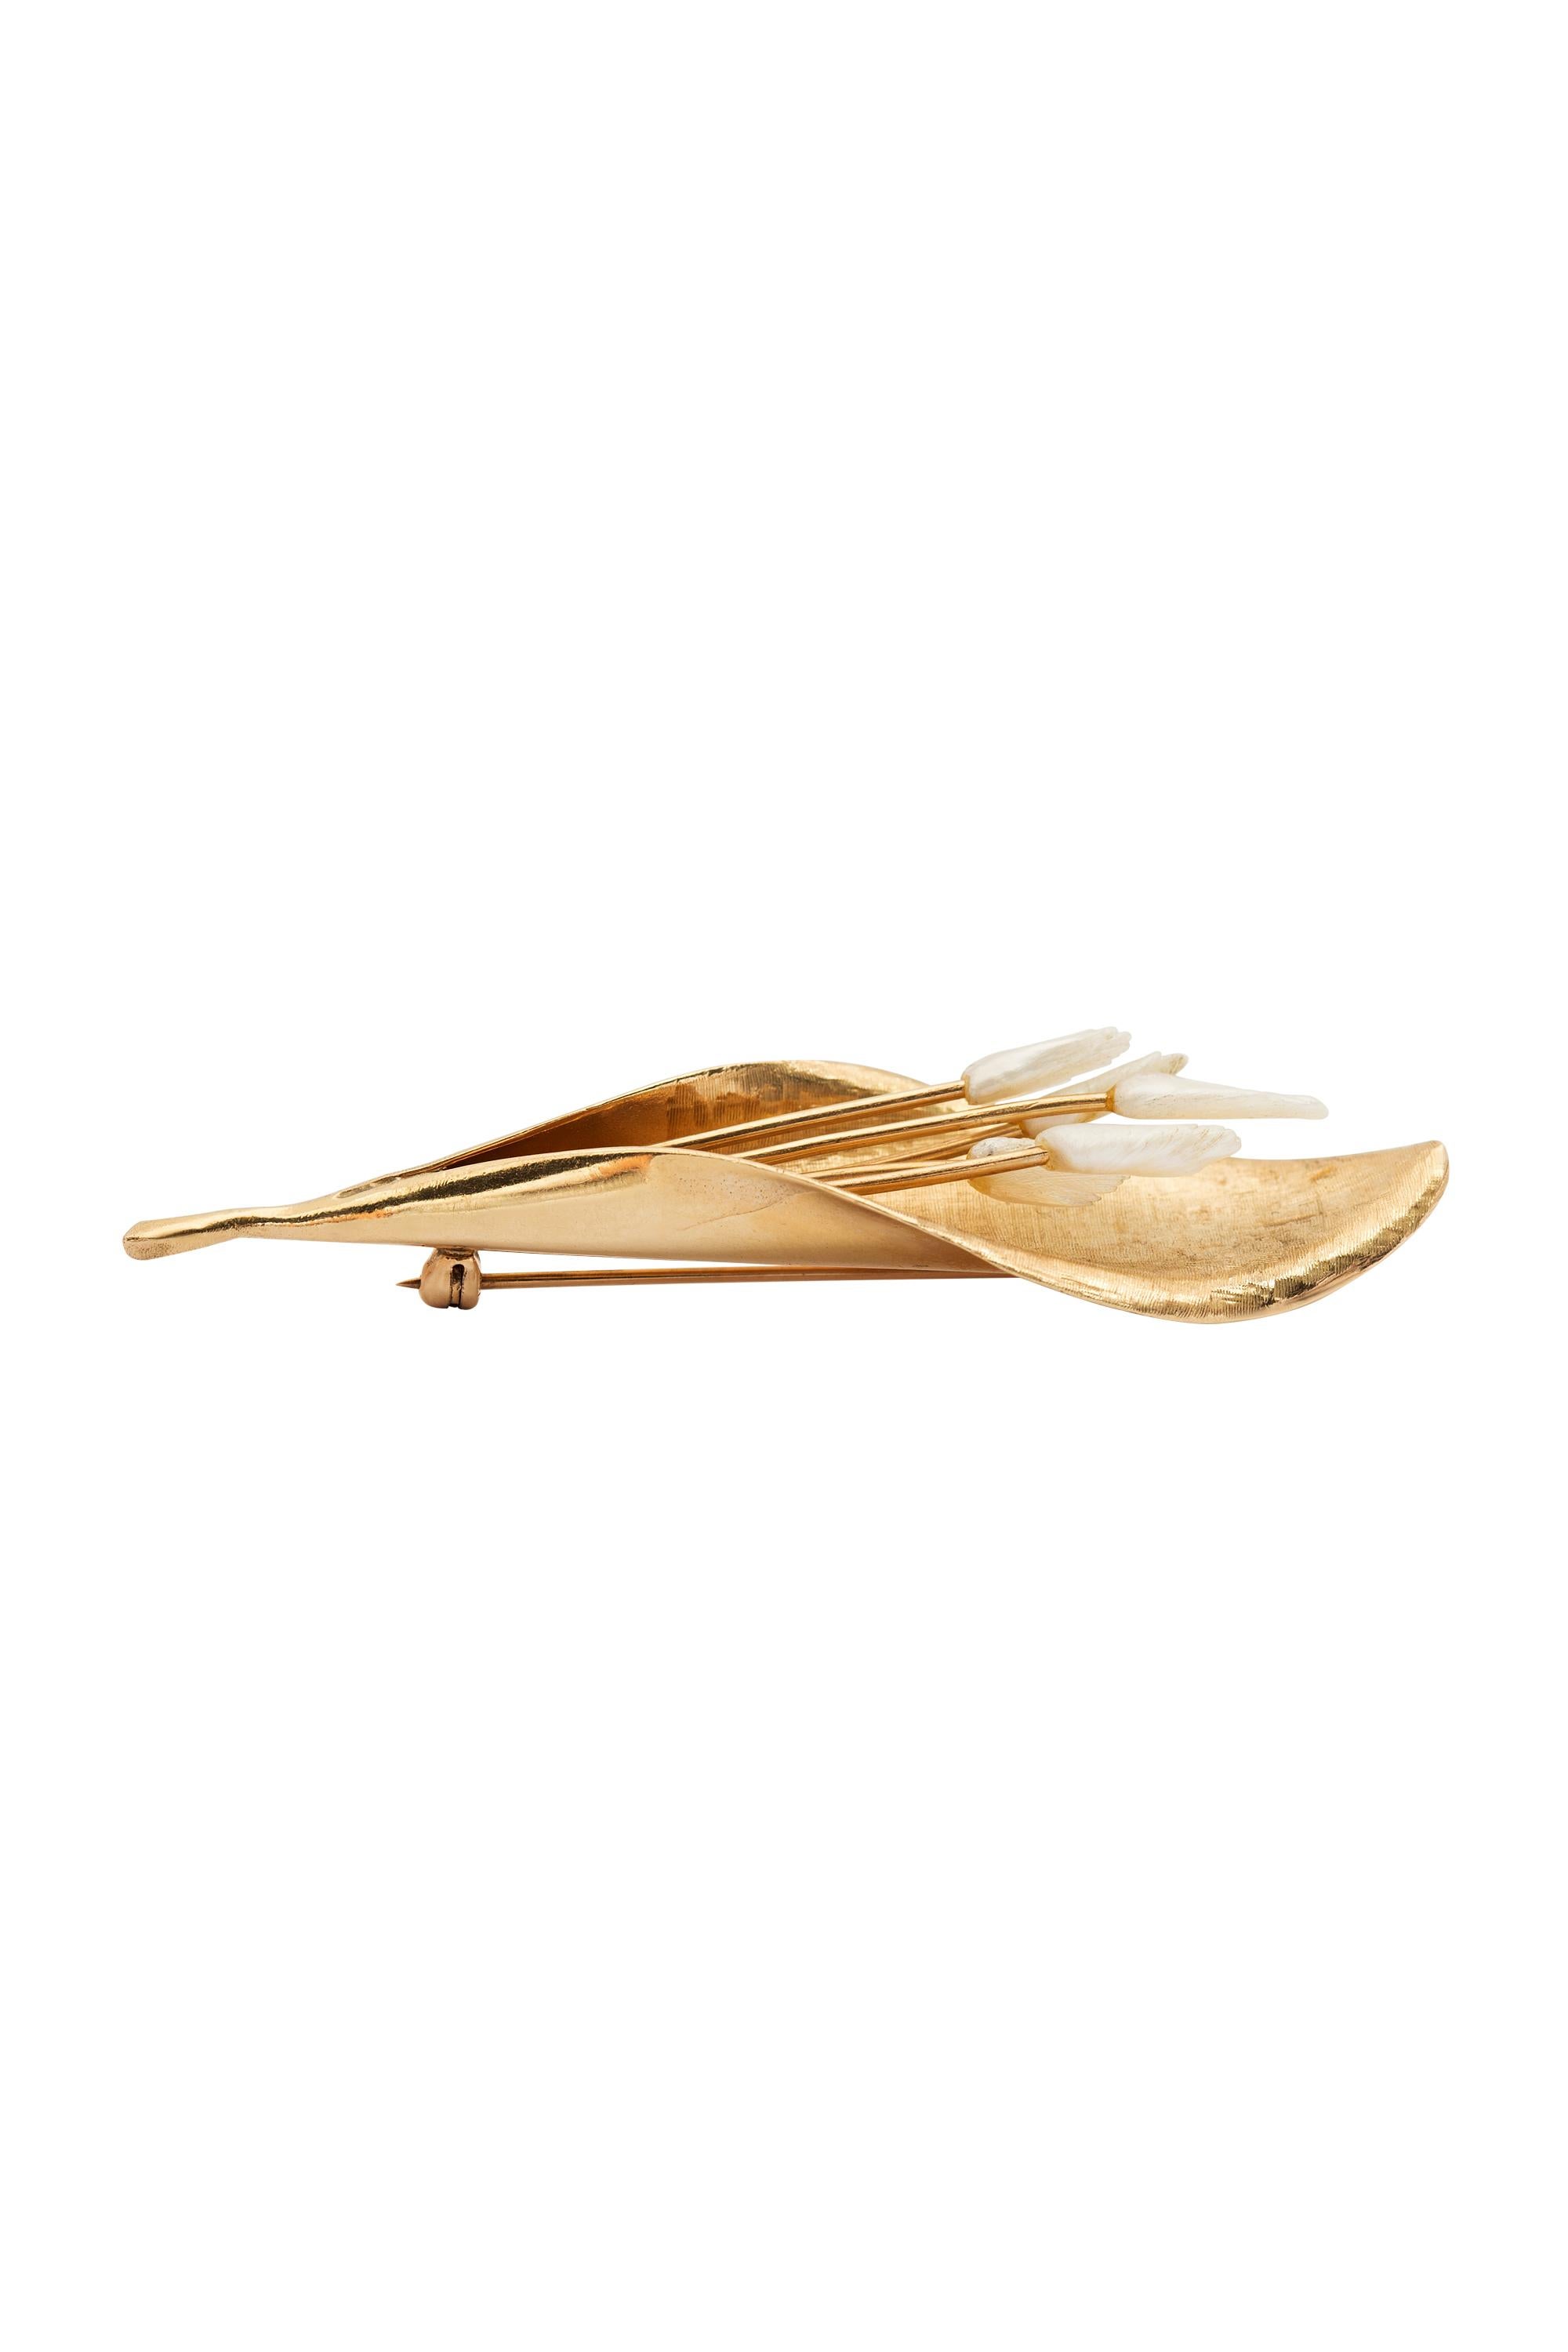 Vintage 14K Yellow Gold Flower Leaf Brooch with 4 Baroque Pearls In Excellent Condition For Sale In beverly hills, CA